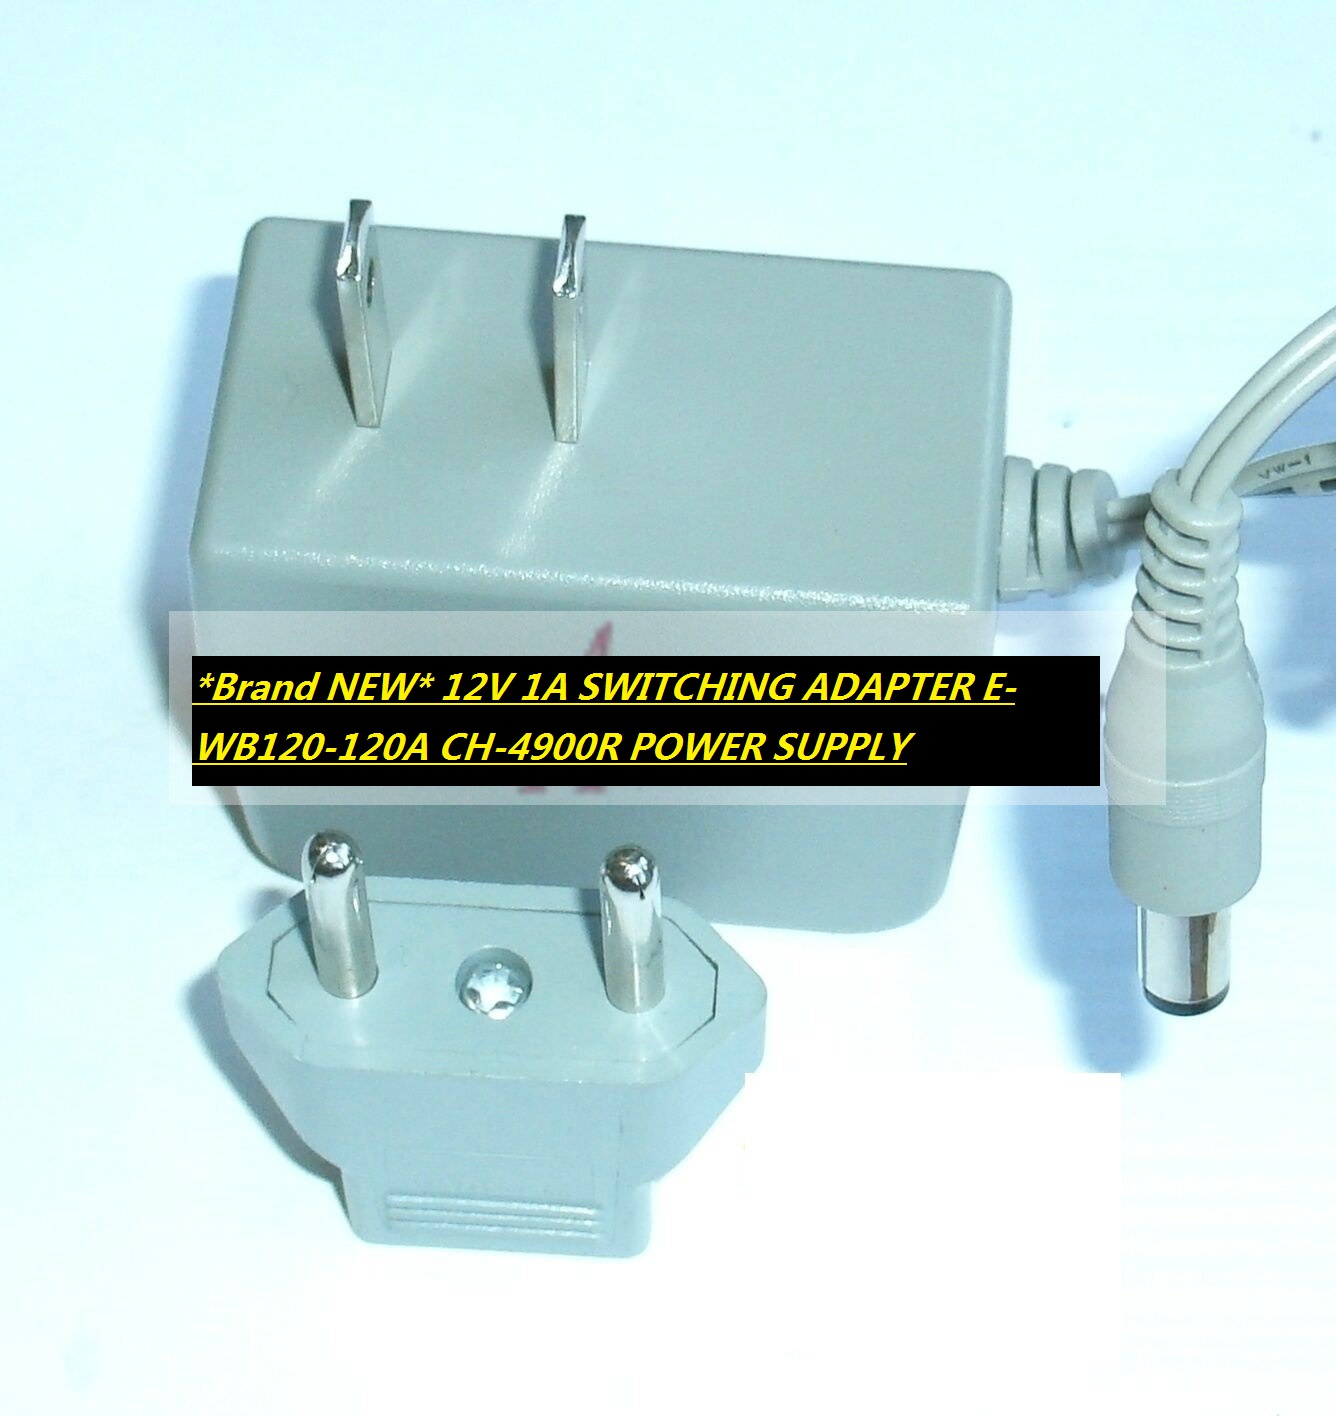 *Brand NEW* 12V 1A SWITCHING ADAPTER E-WB120-120A CH-4900R POWER SUPPLY